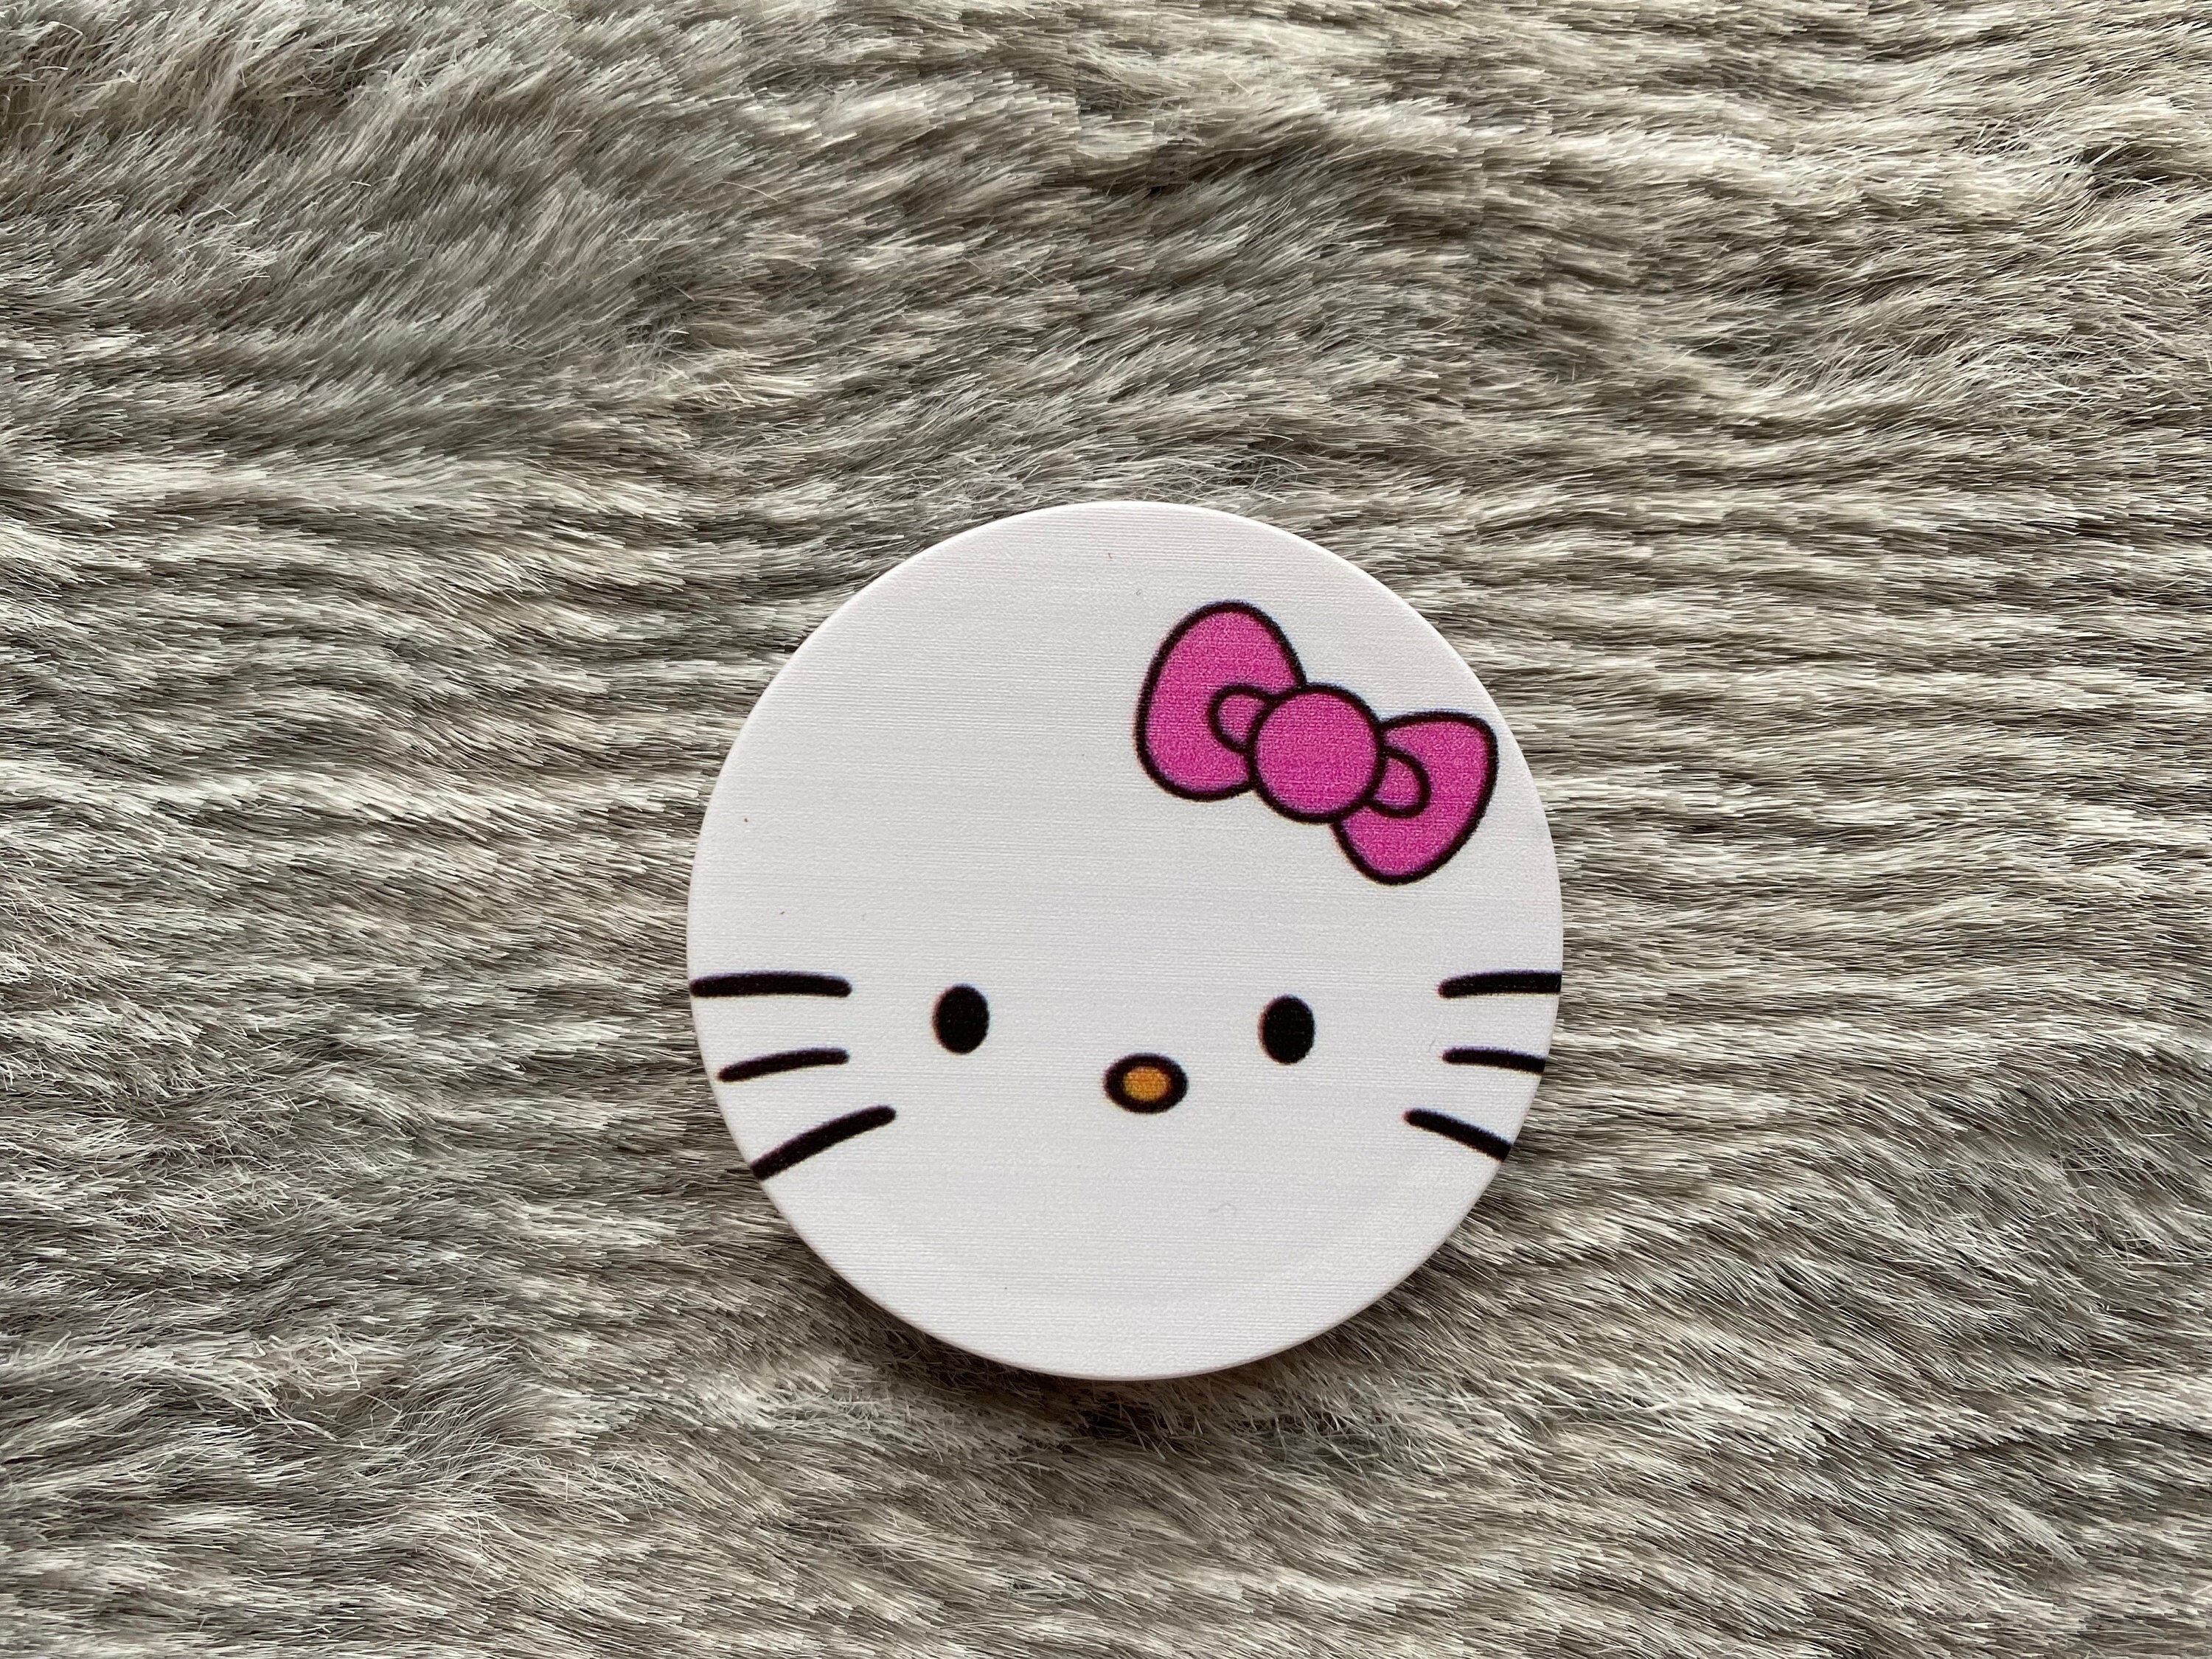 Anime Pop Socket Gifts  Merchandise for Sale  Redbubble